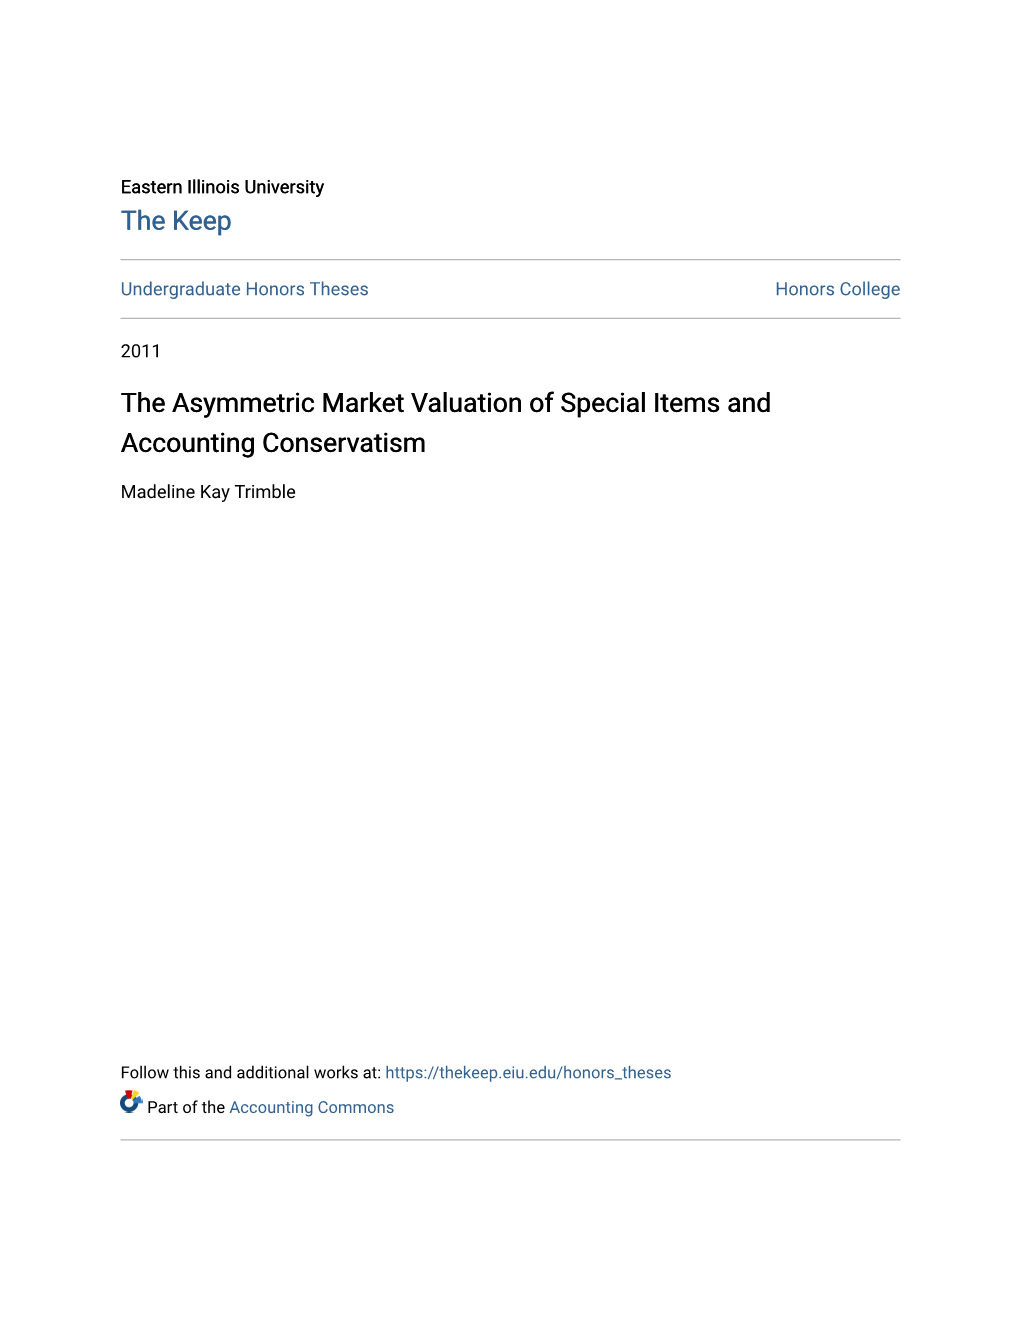 The Asymmetric Market Valuation of Special Items and Accounting Conservatism